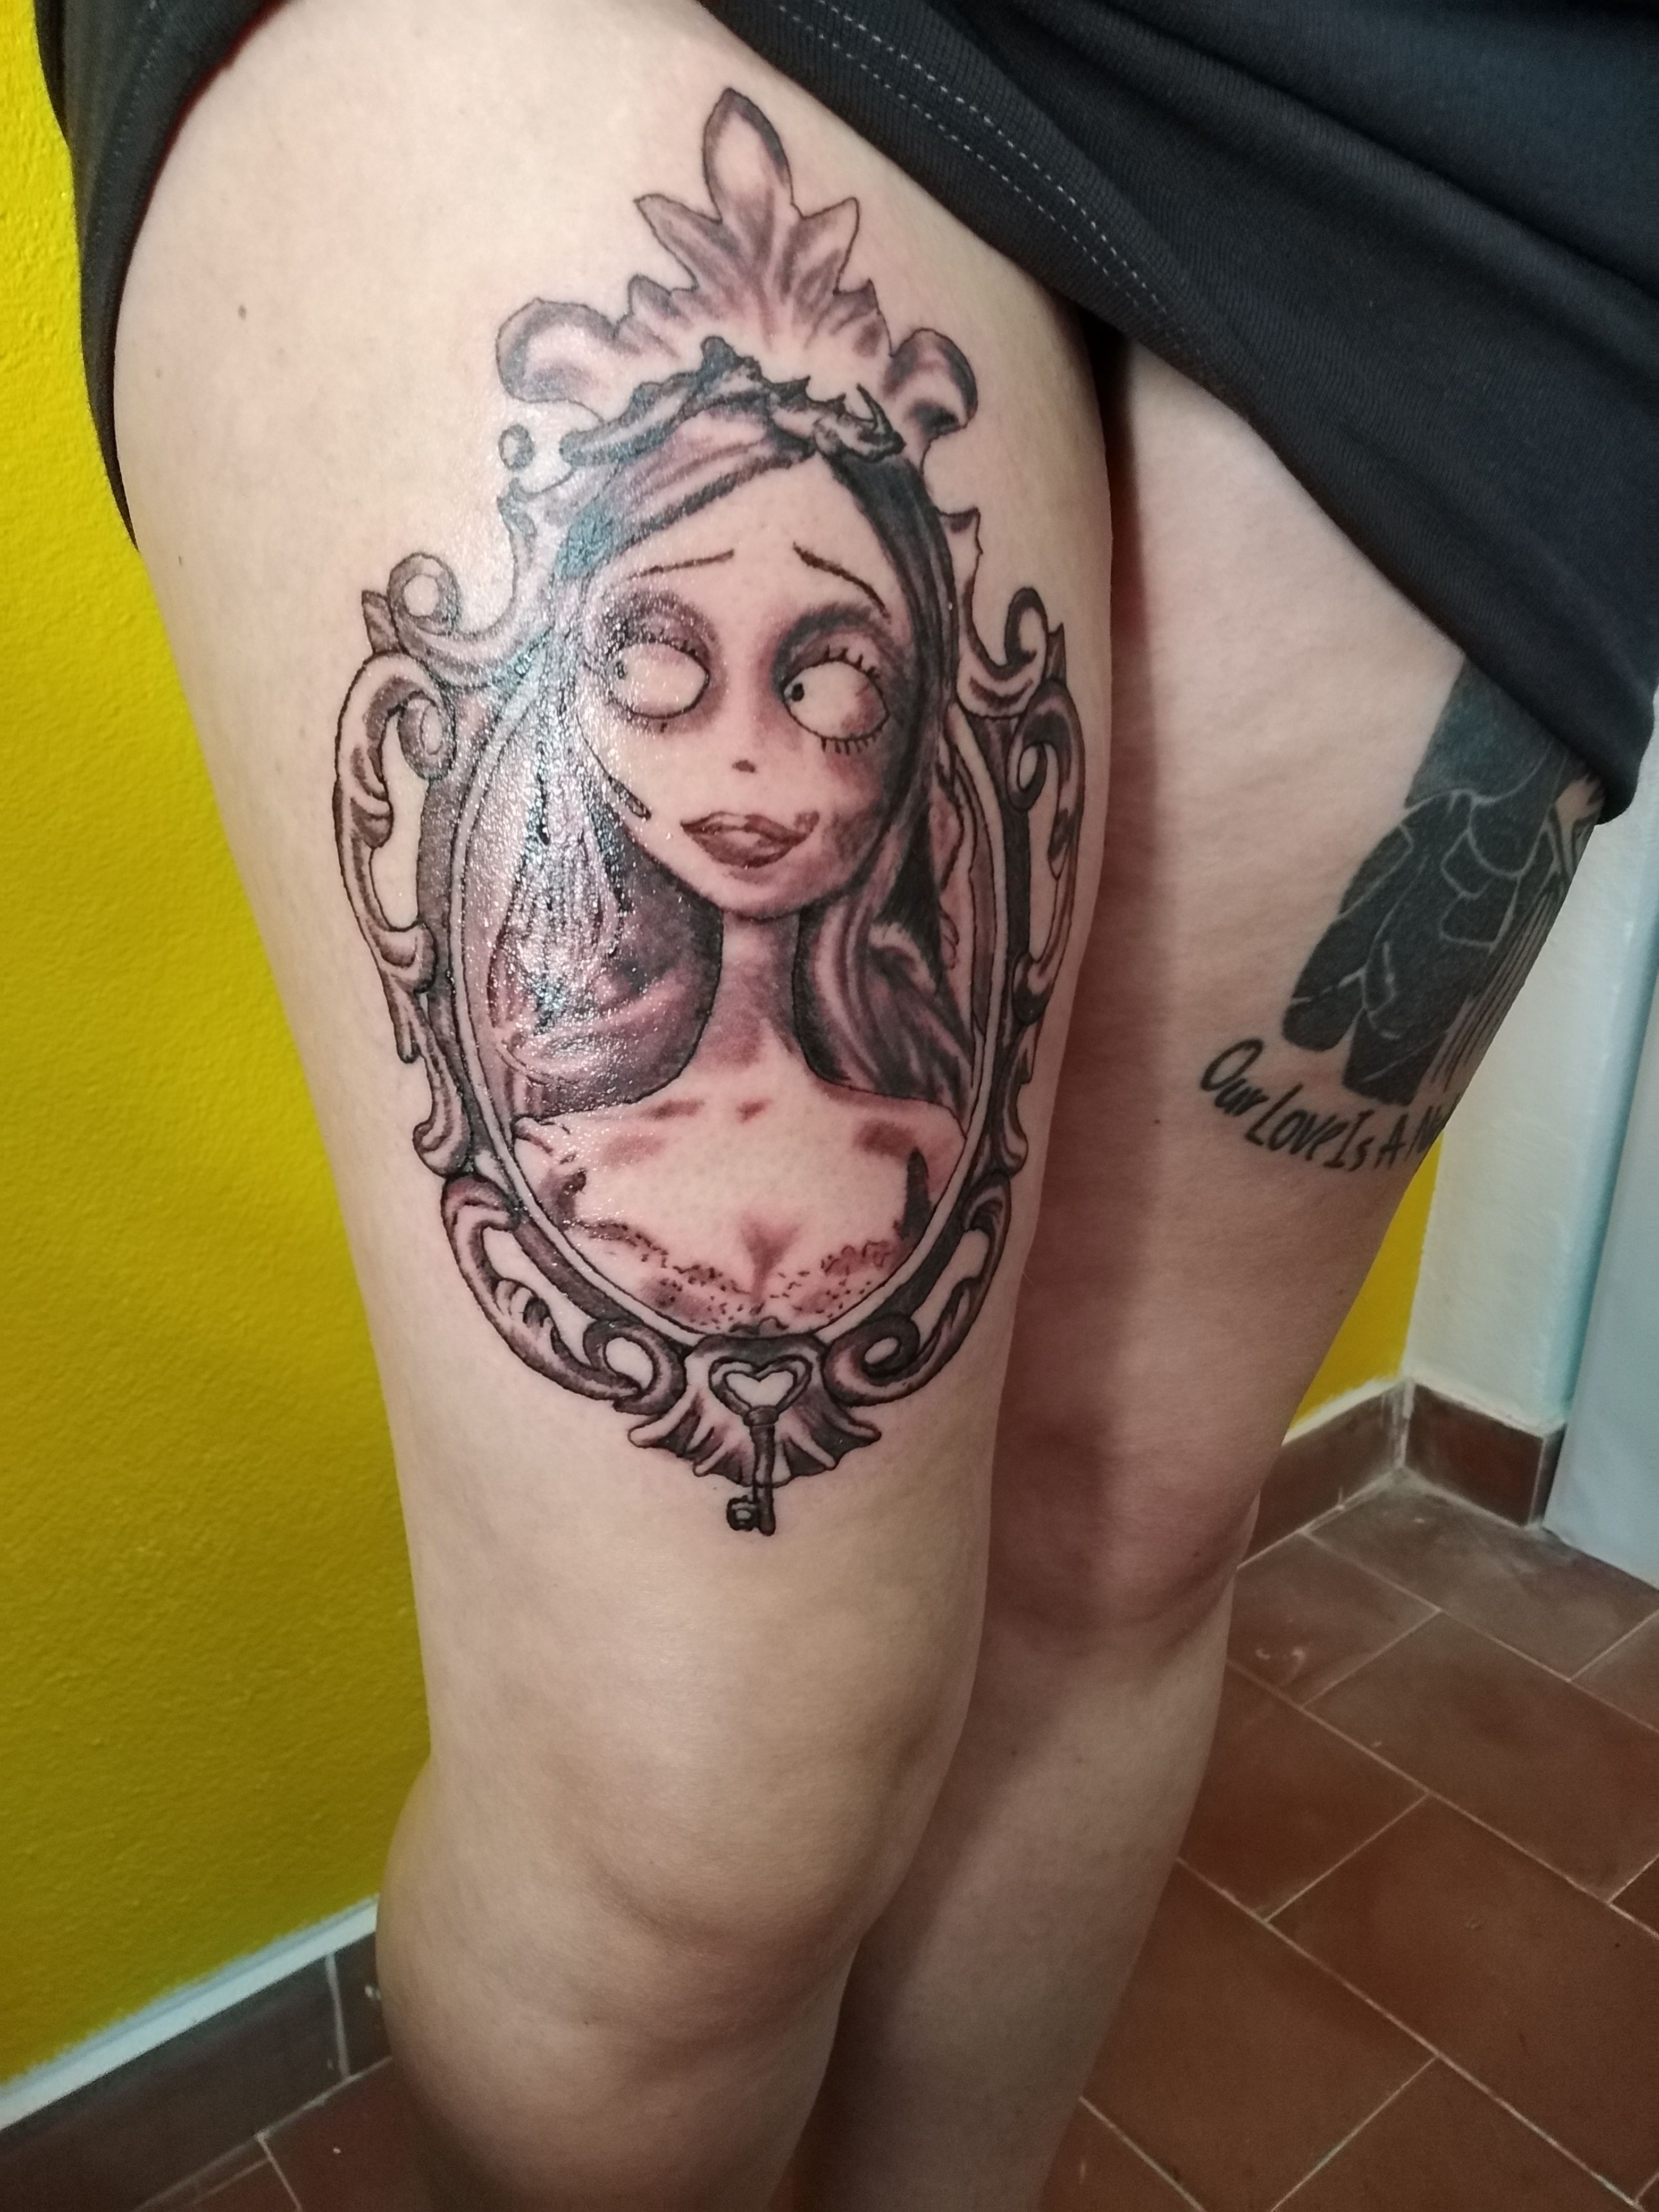 Emily from Corpse Bride tattoo by Eddsworldfangirl97 on DeviantArt